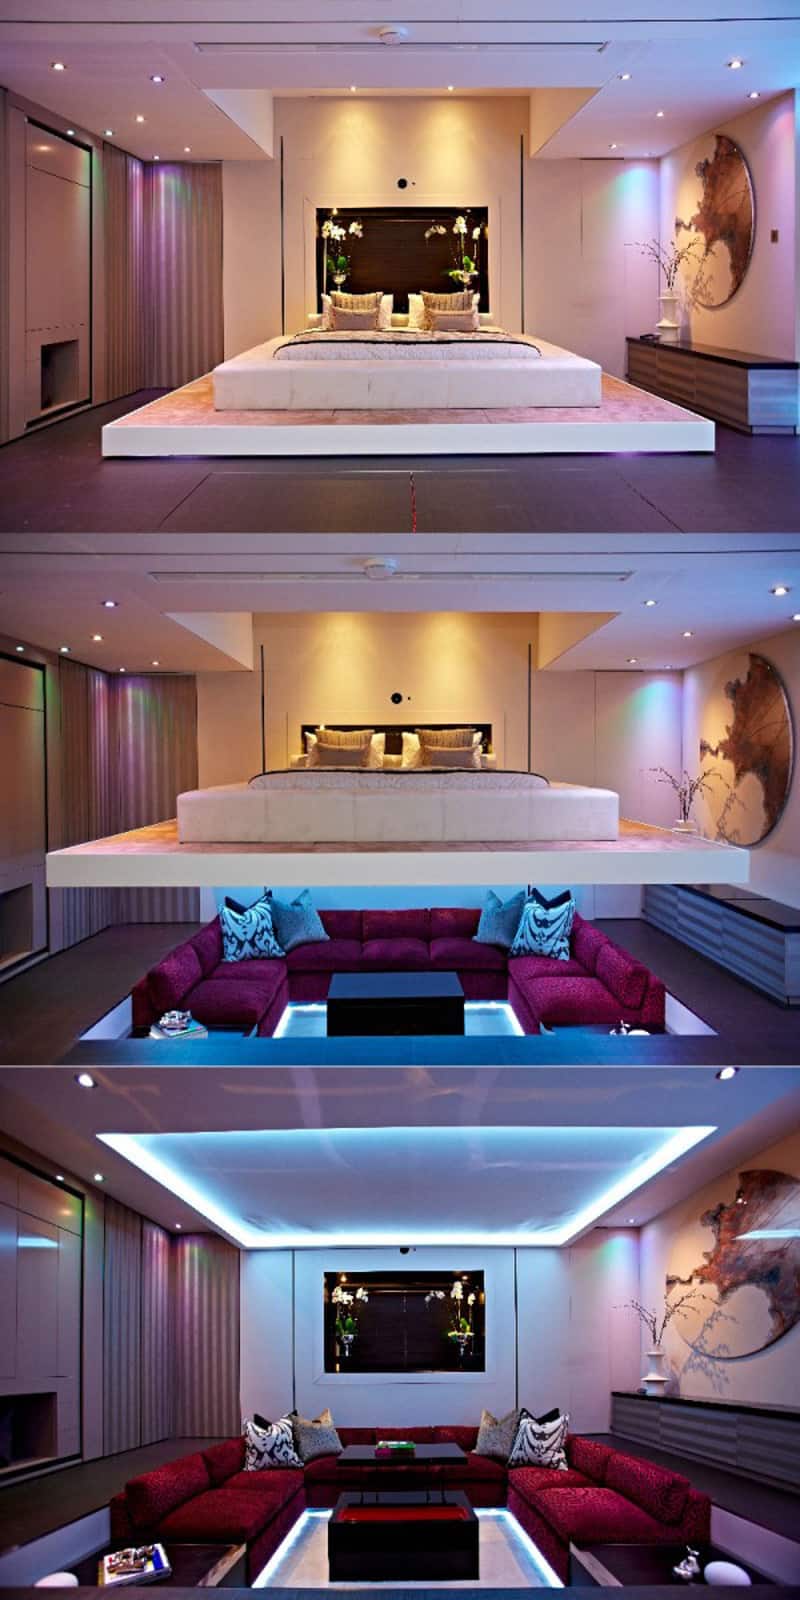 designrulz- Space Saving Beds and Bedrooms (6)